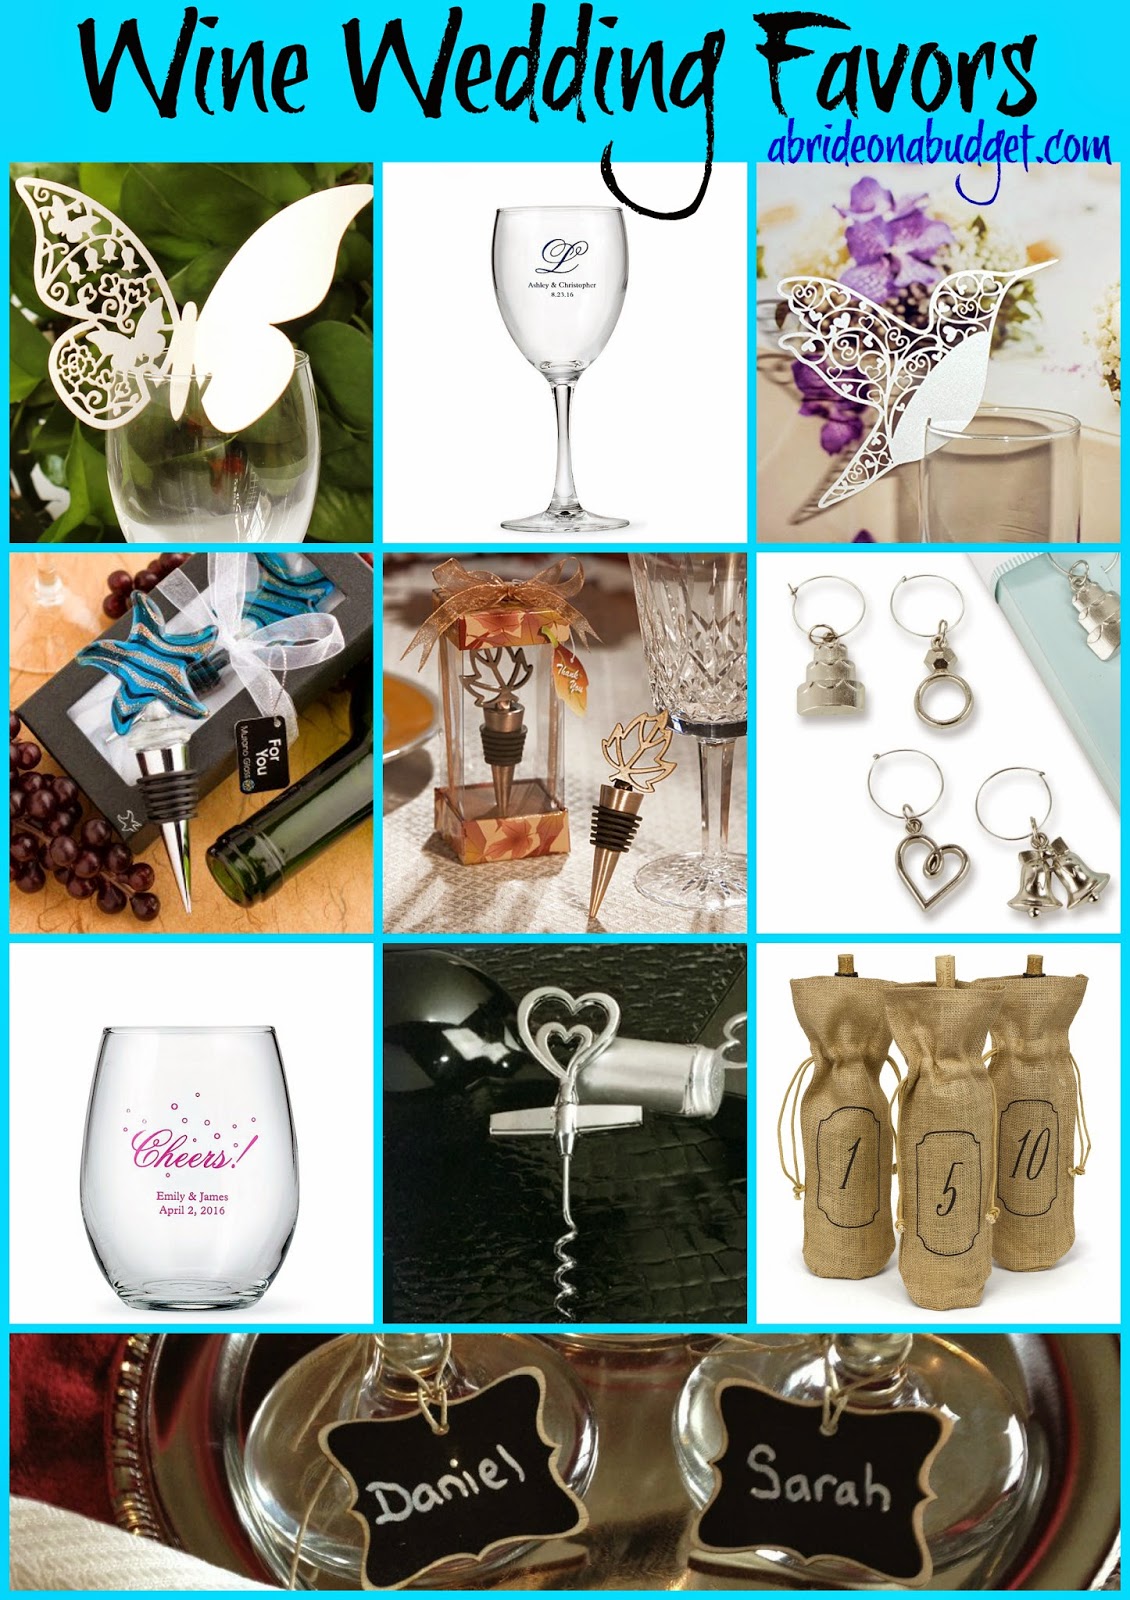 If you love wine, incorporate it into your wedding with wine wedding favors. Get ideas for some in this post on www.abrideonabudget.com.